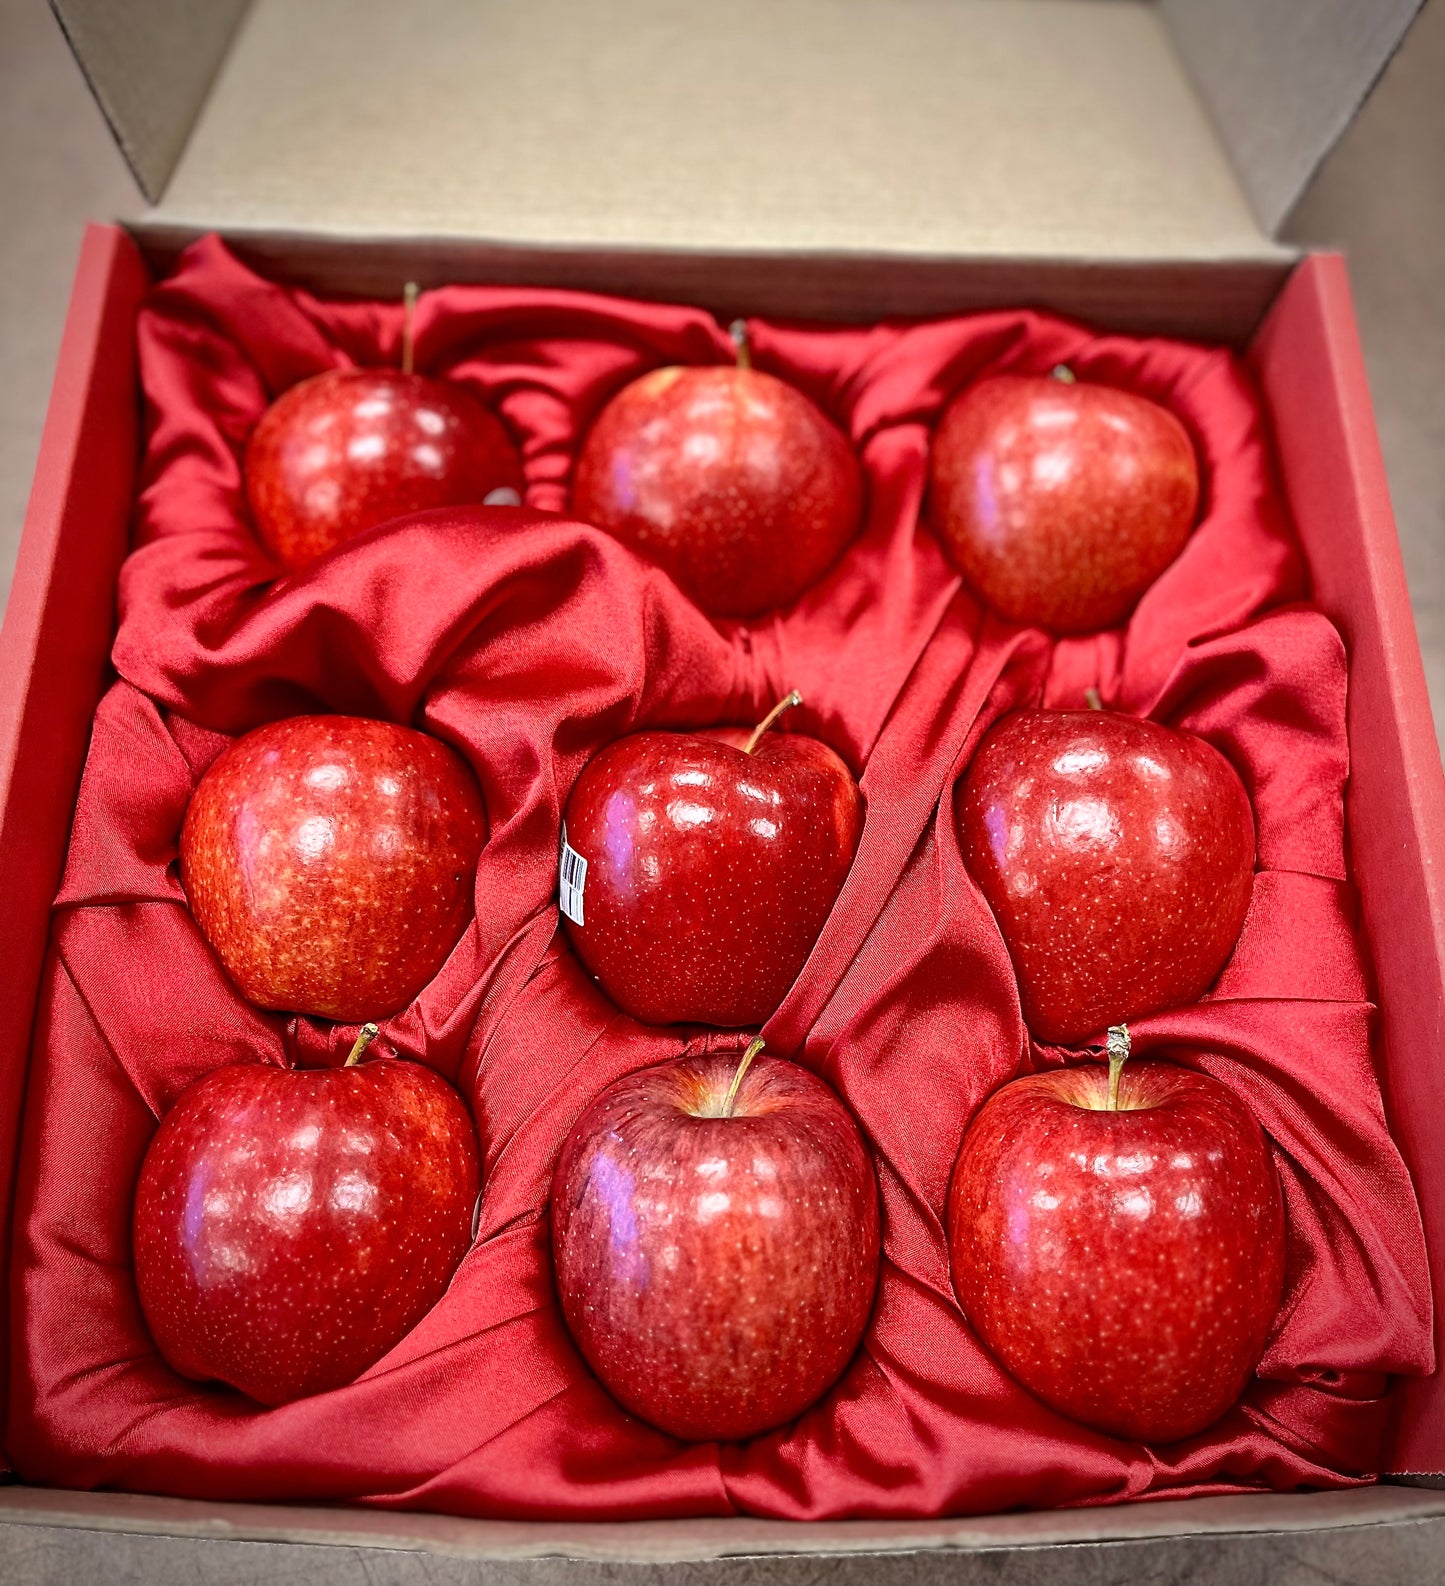 **FEATURED APPLE** - Envy Apples